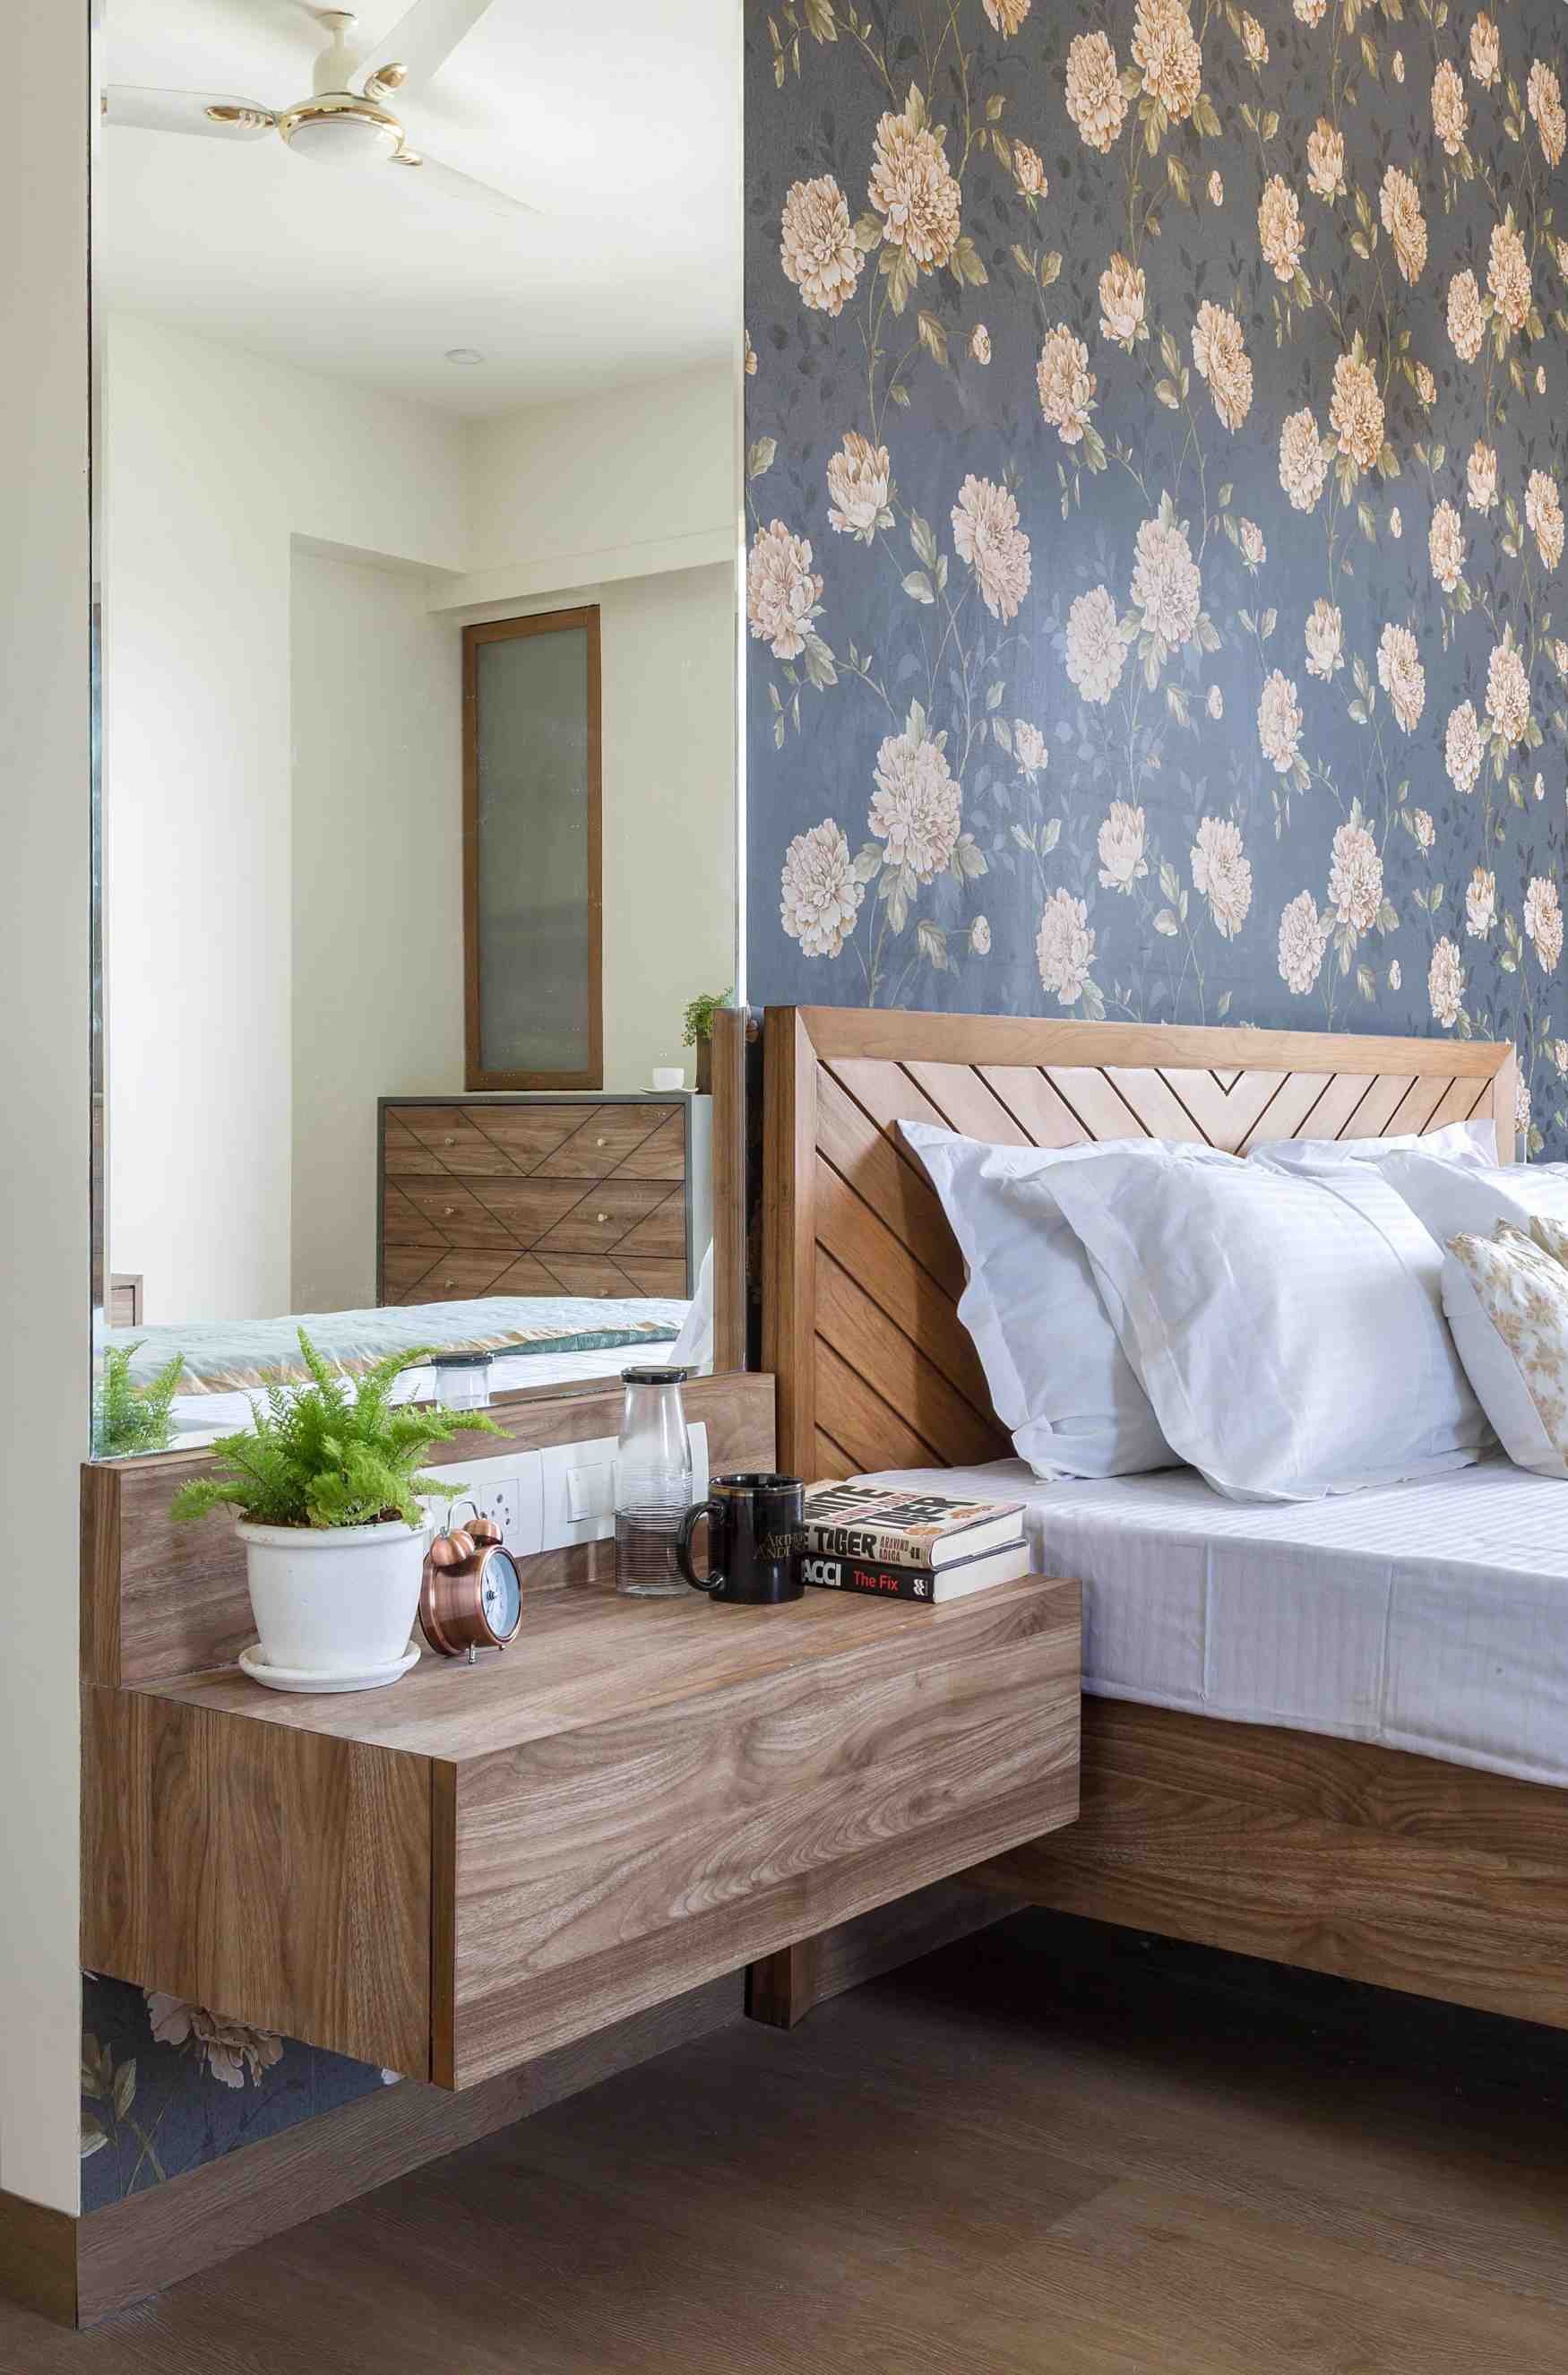 What's the Best Wall Panelling for Bedrooms?